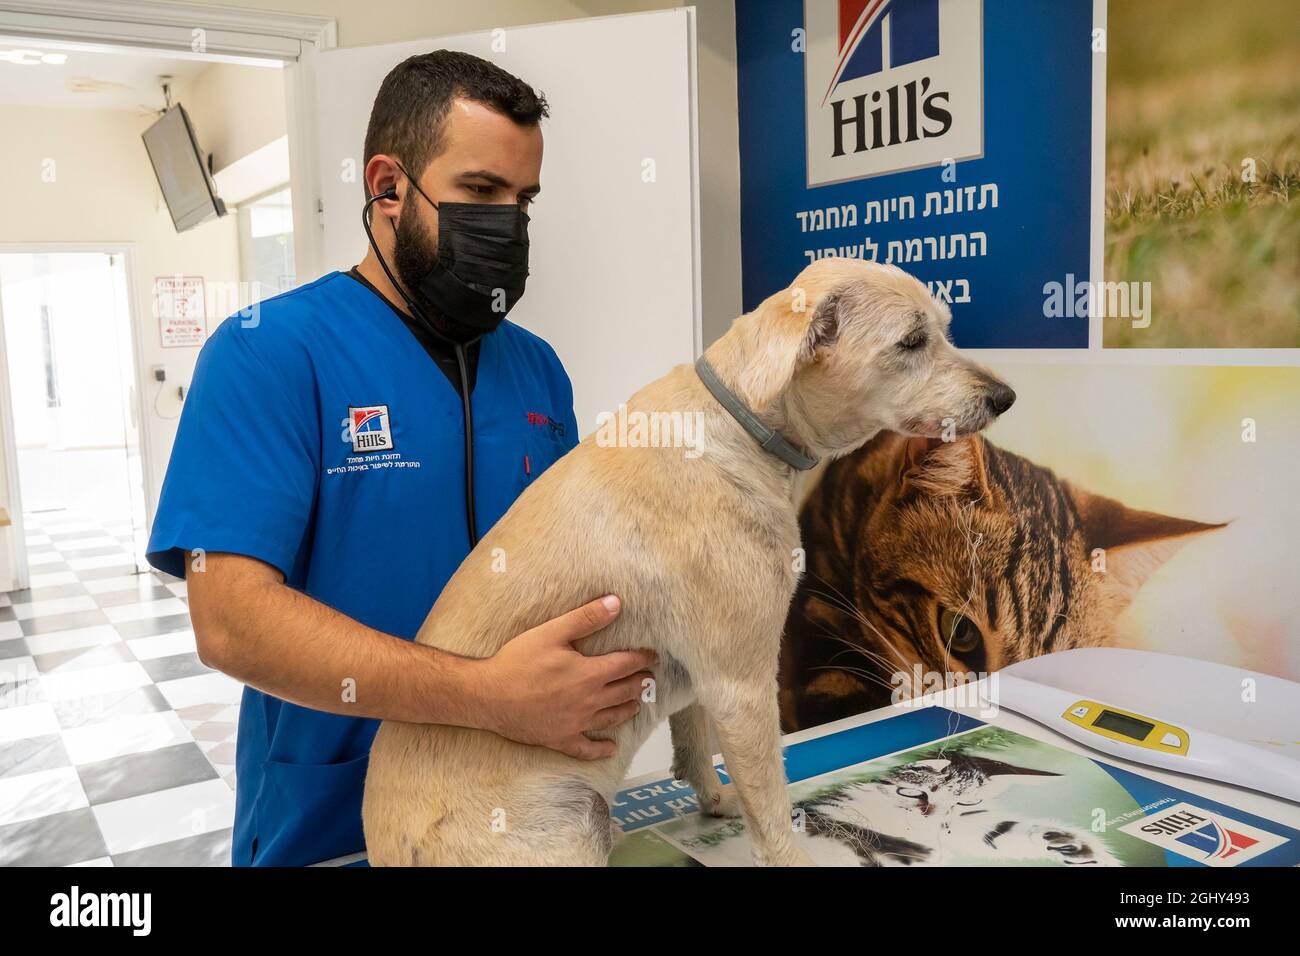 Tel Aviv, Israel - August 17th, 2021: A vet examining a dog in a veterinary clinic. The dog swallowed a fishing hook, and the line is coming out of it Stock Photo